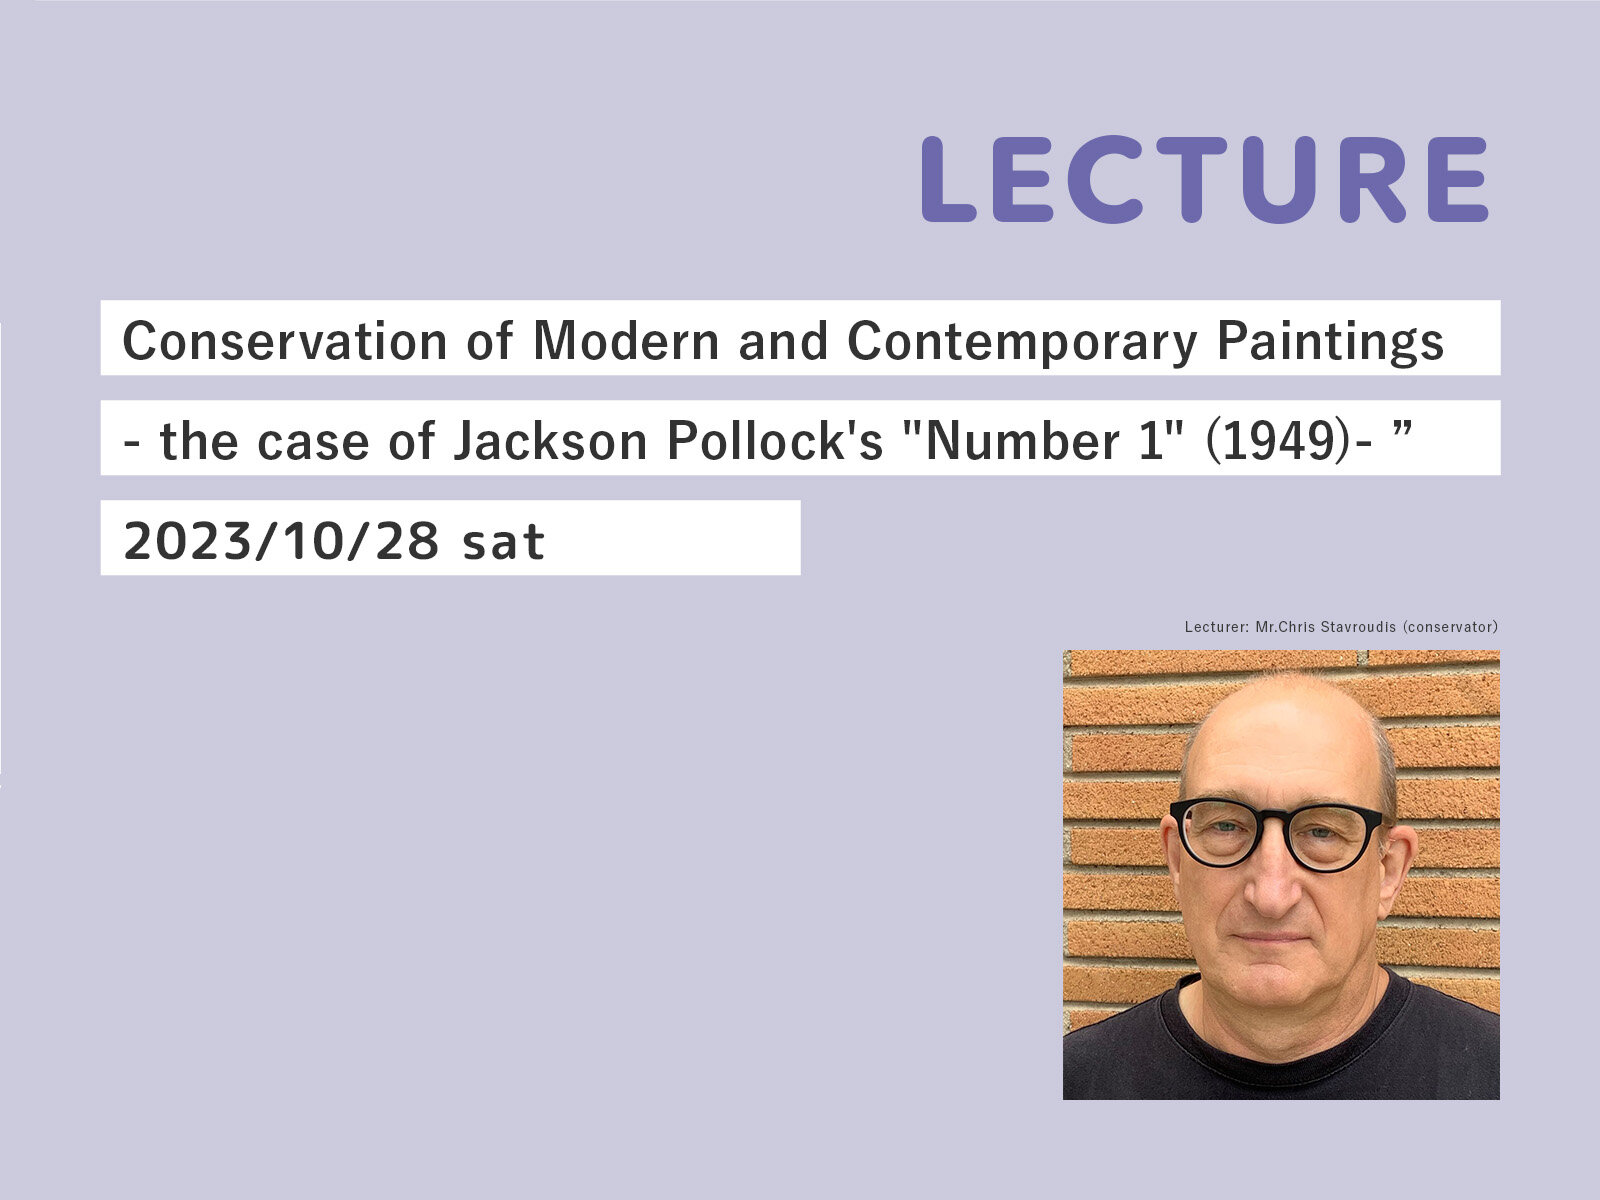 The Lecture on Conservation “Conservation of Modern and Contemporary Paintings - the case of Jackson Pollock's 